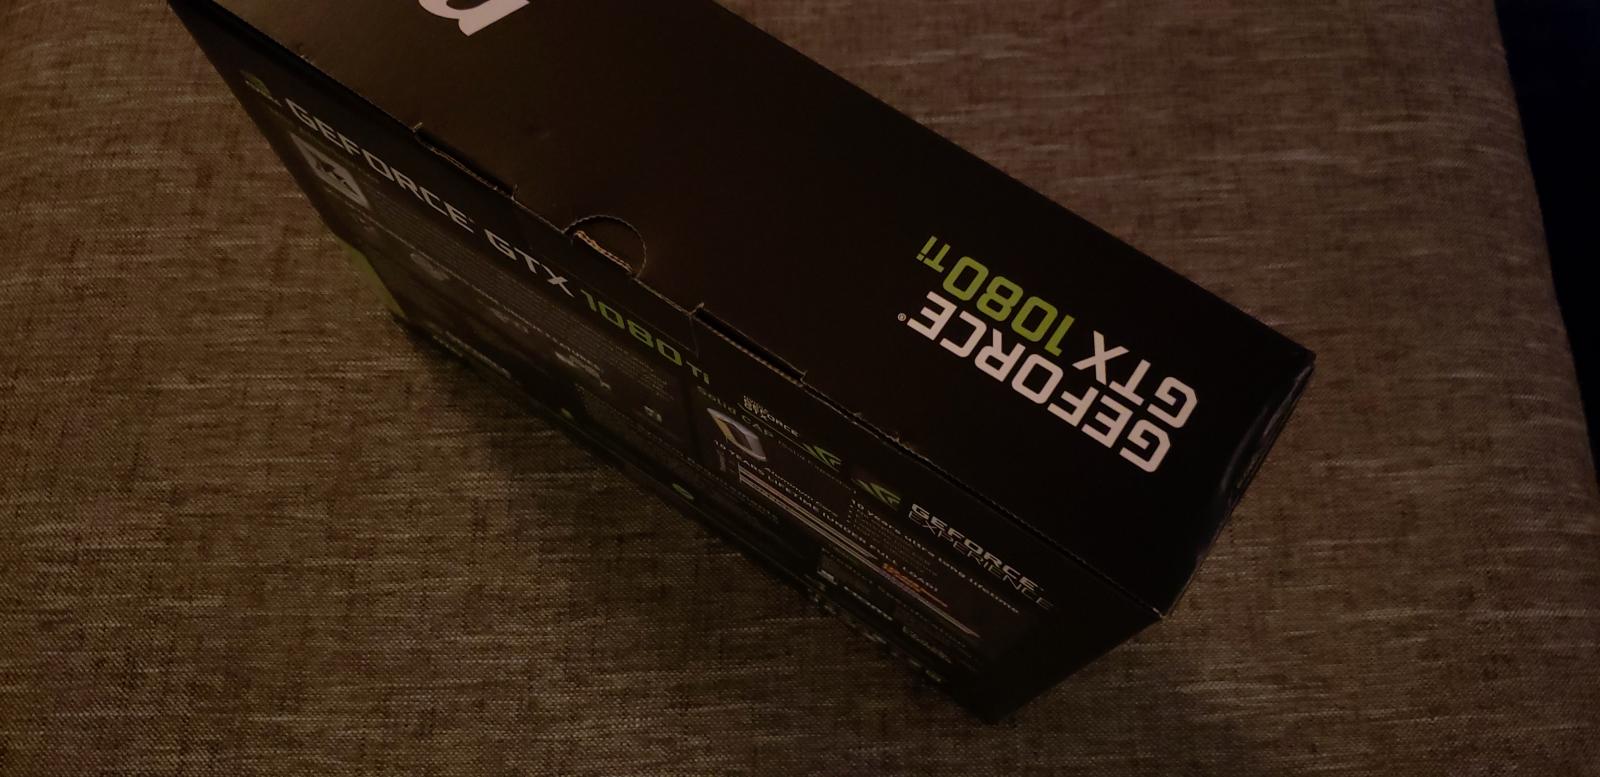 For sale MSI GTX 1080 Ti Founders Edition with original box